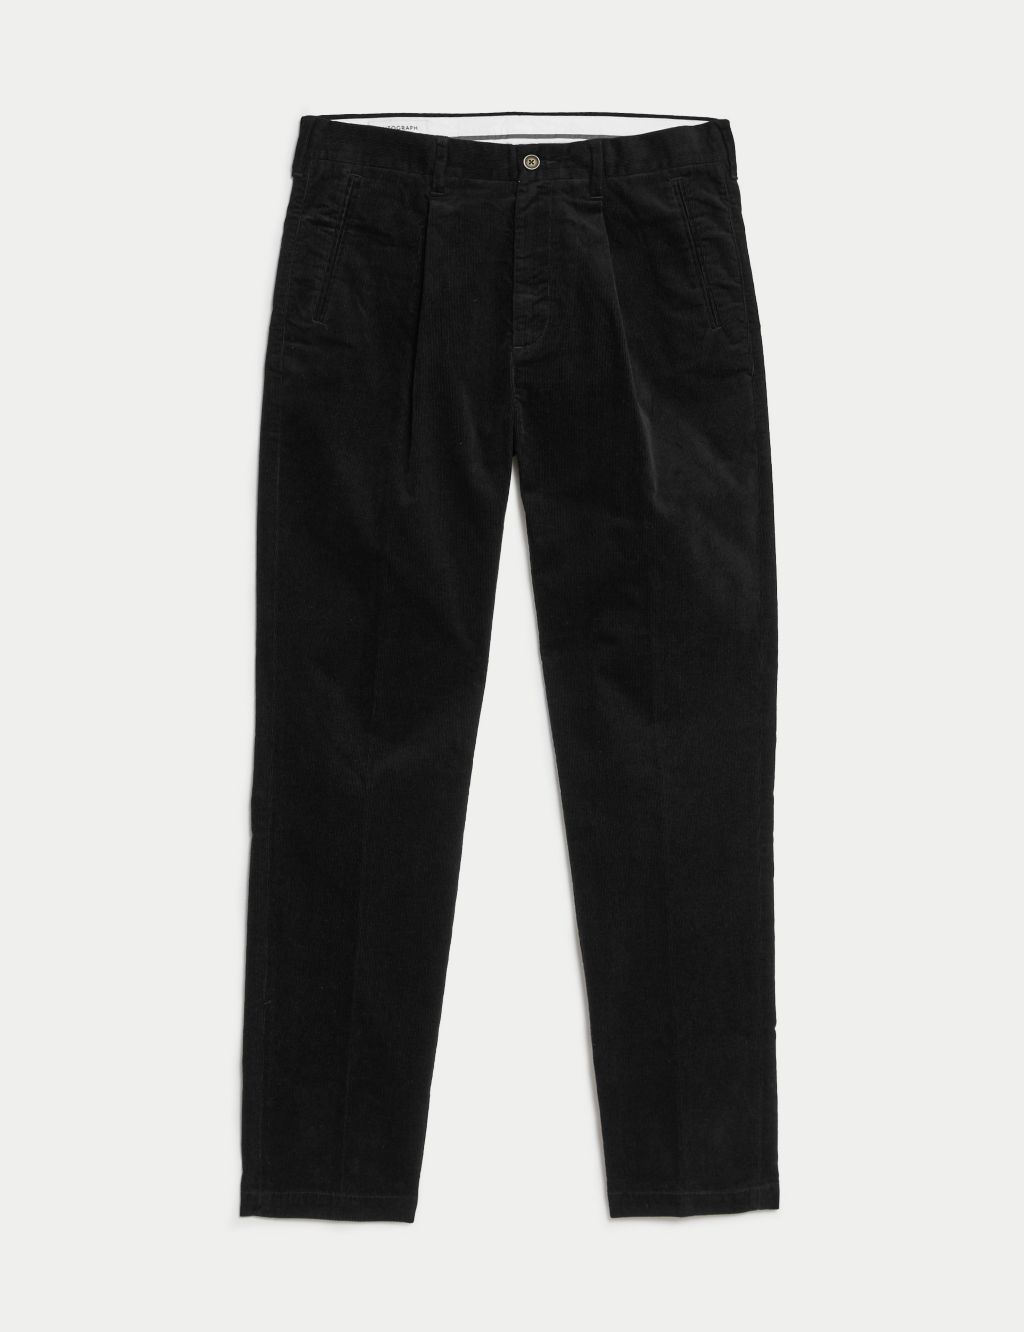 Tapered Fit Corduroy Single Pleat Trousers image 2